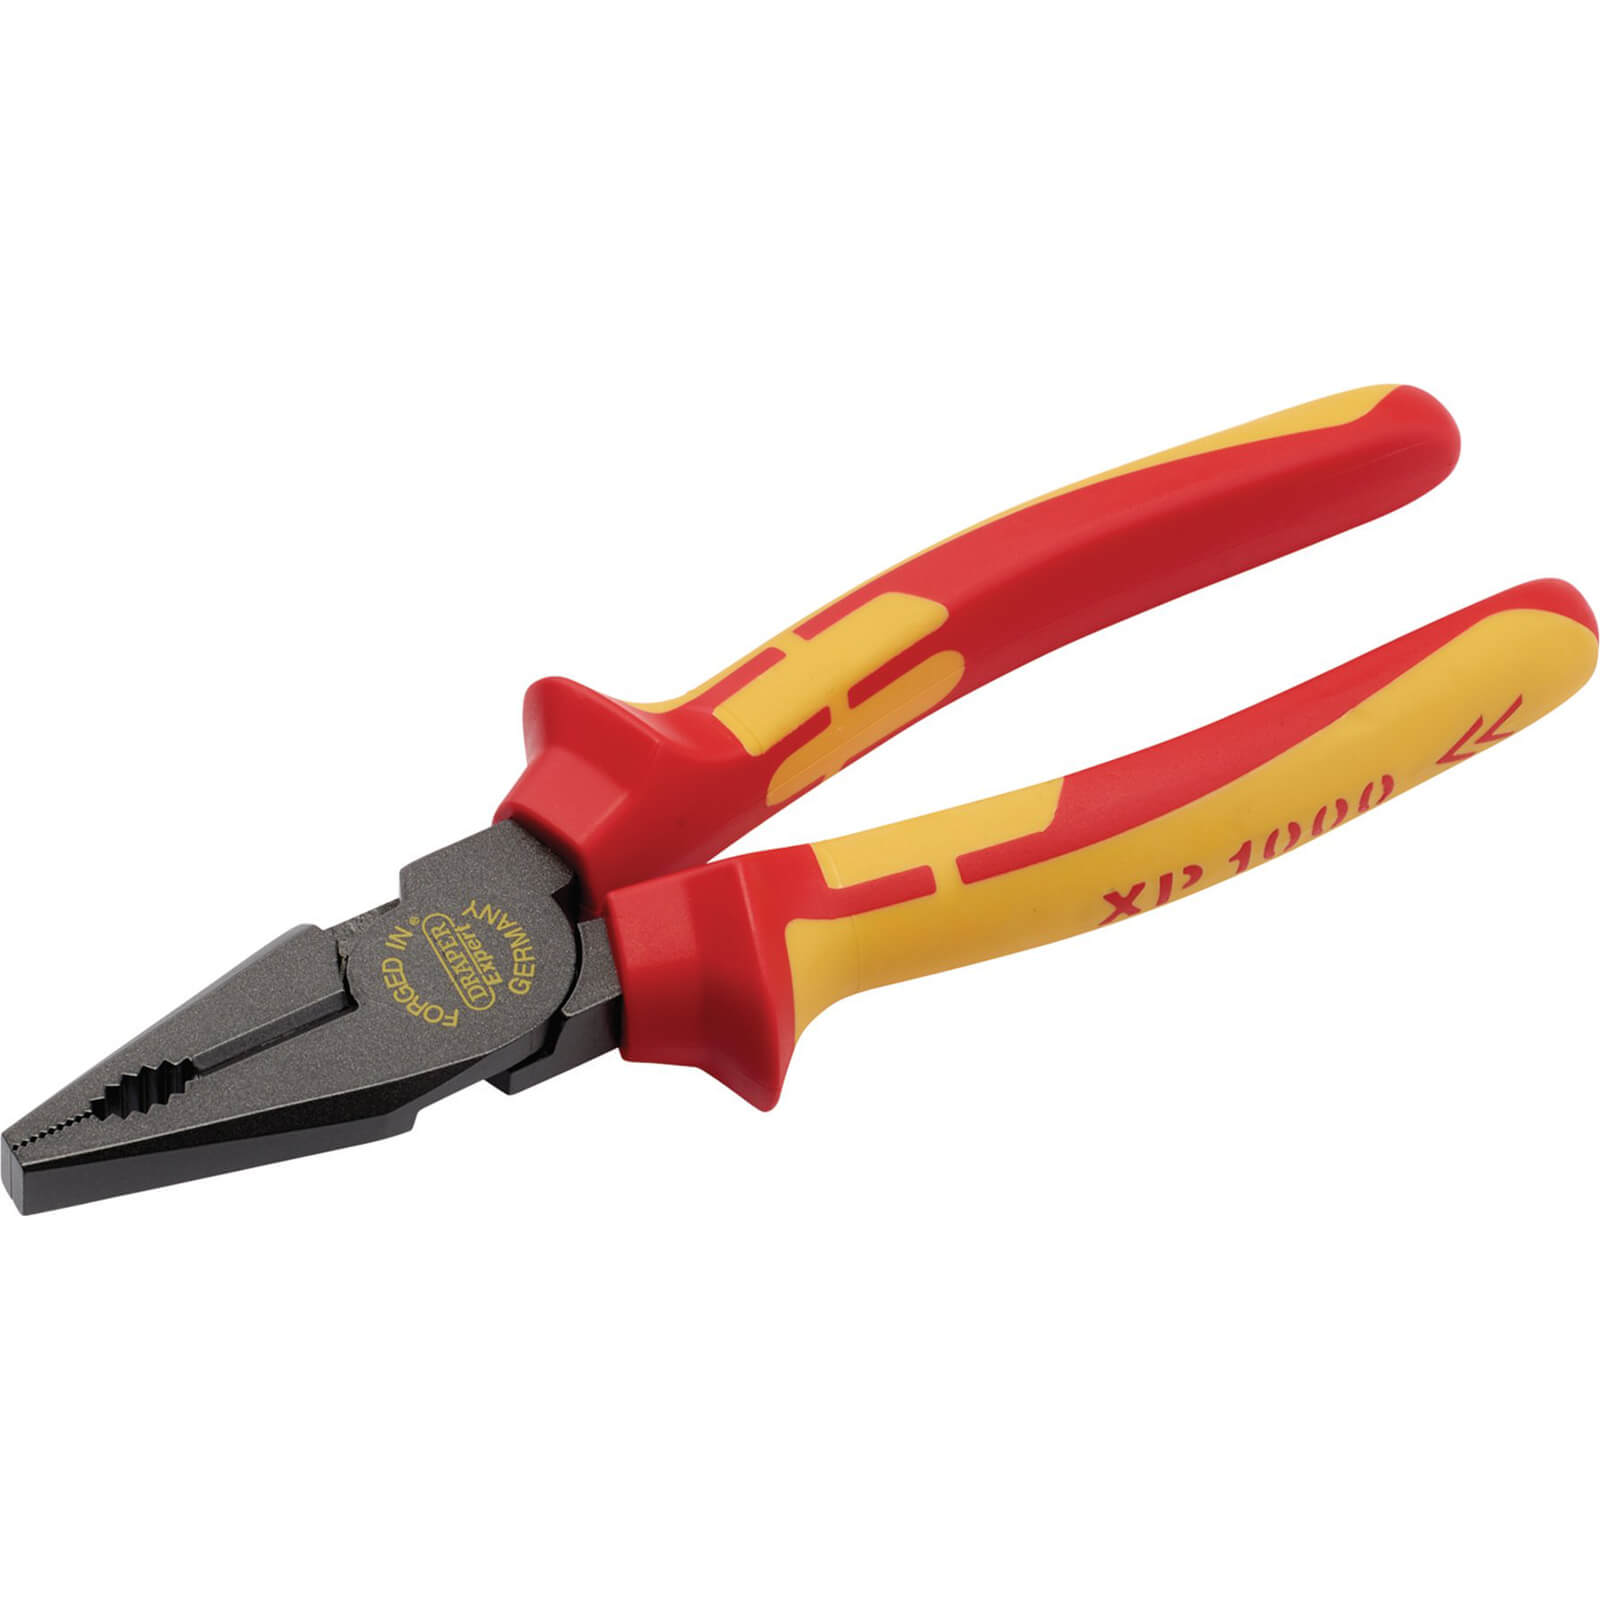 Draper XP1000 VDE Insulated High Leverage Combination Pliers 200mm